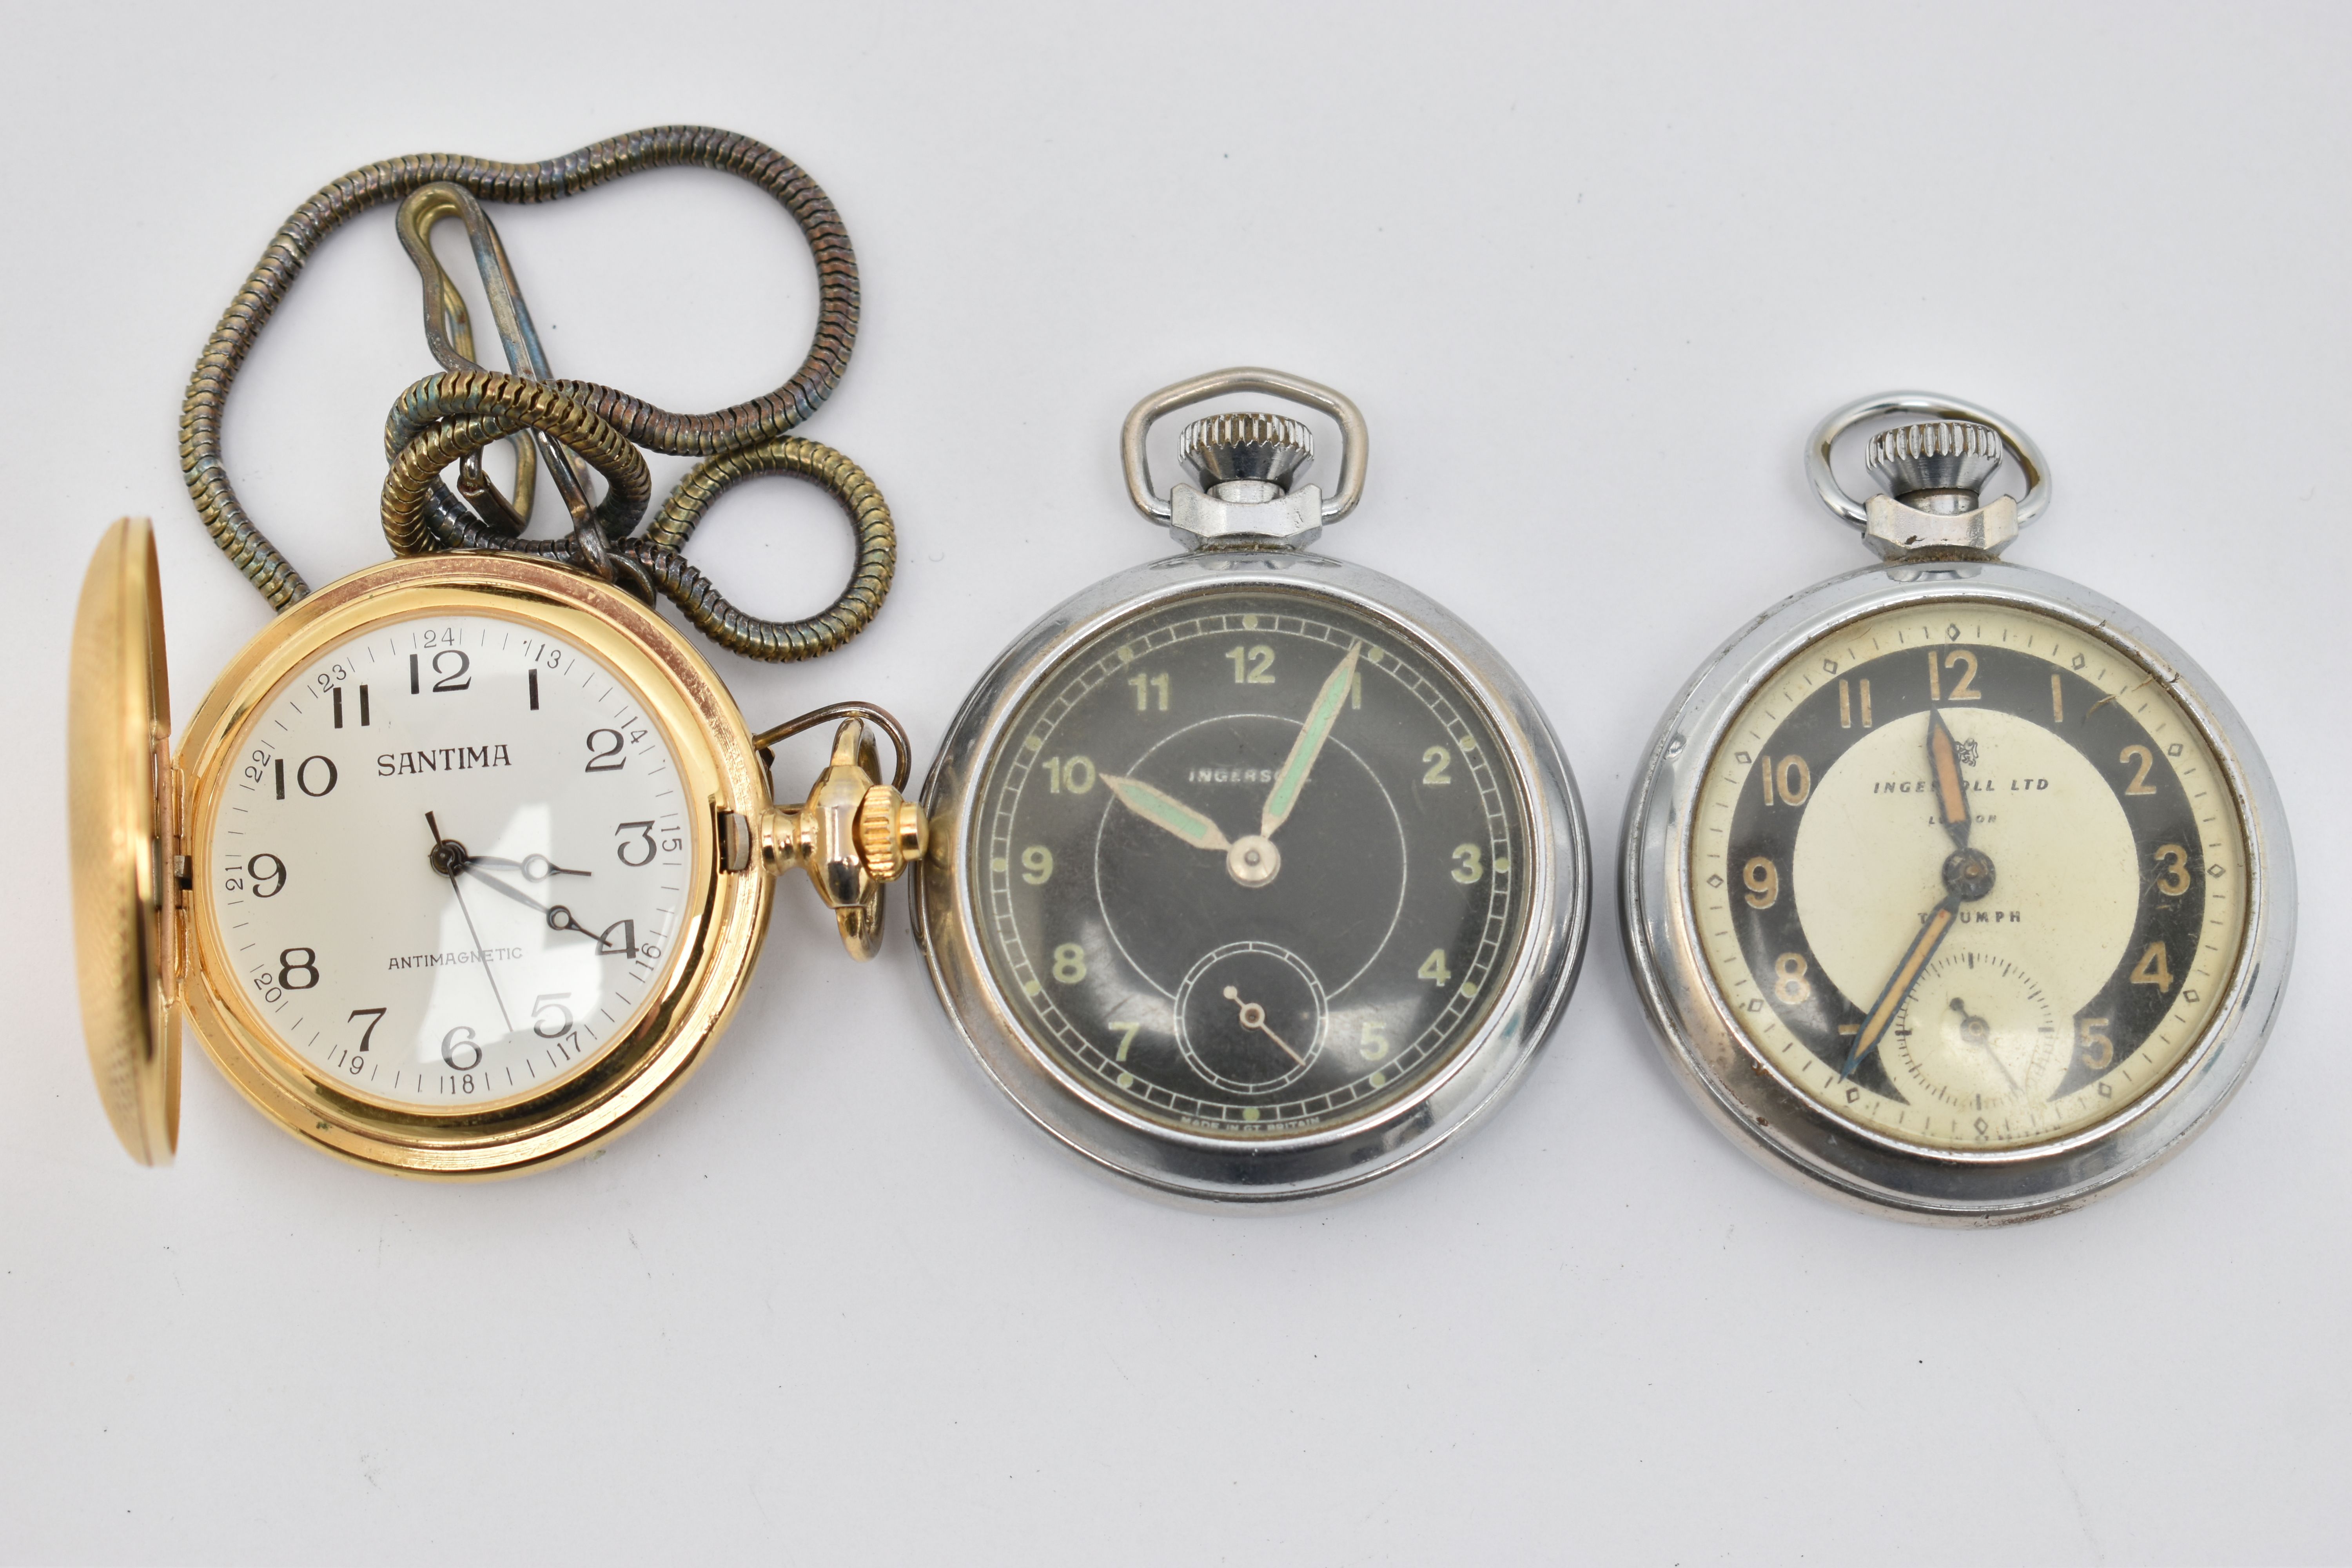 THREE POCKET WATCHES, to include two open face Ingersoll pocket watches, both with Arabic numerals